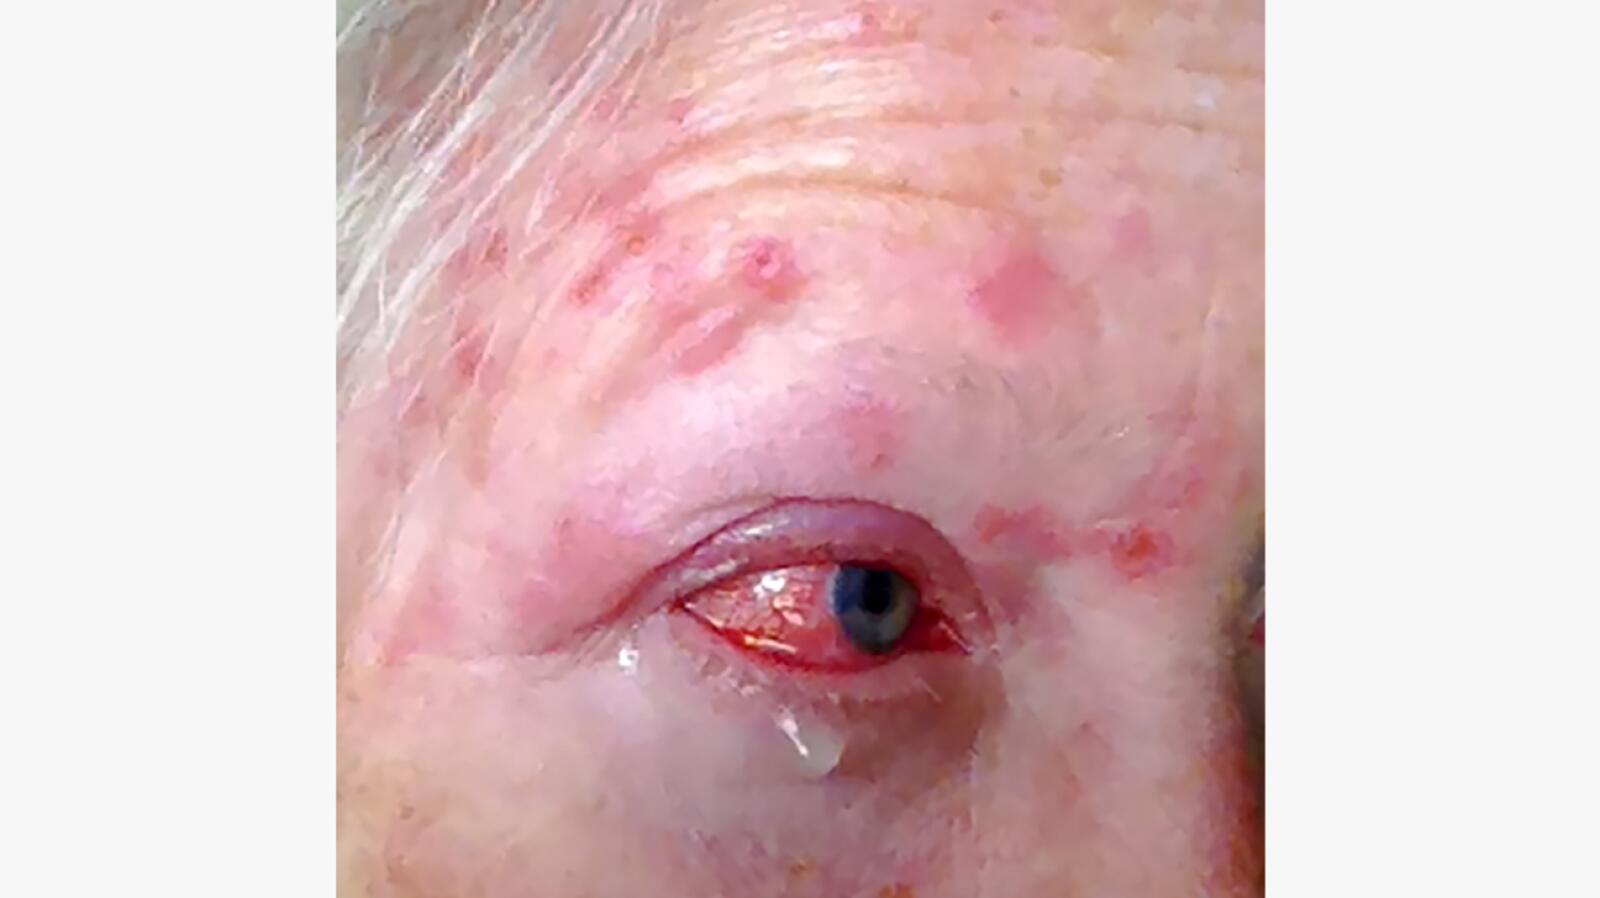 Shingles On The Face What It Looks Like And How To Care For It 